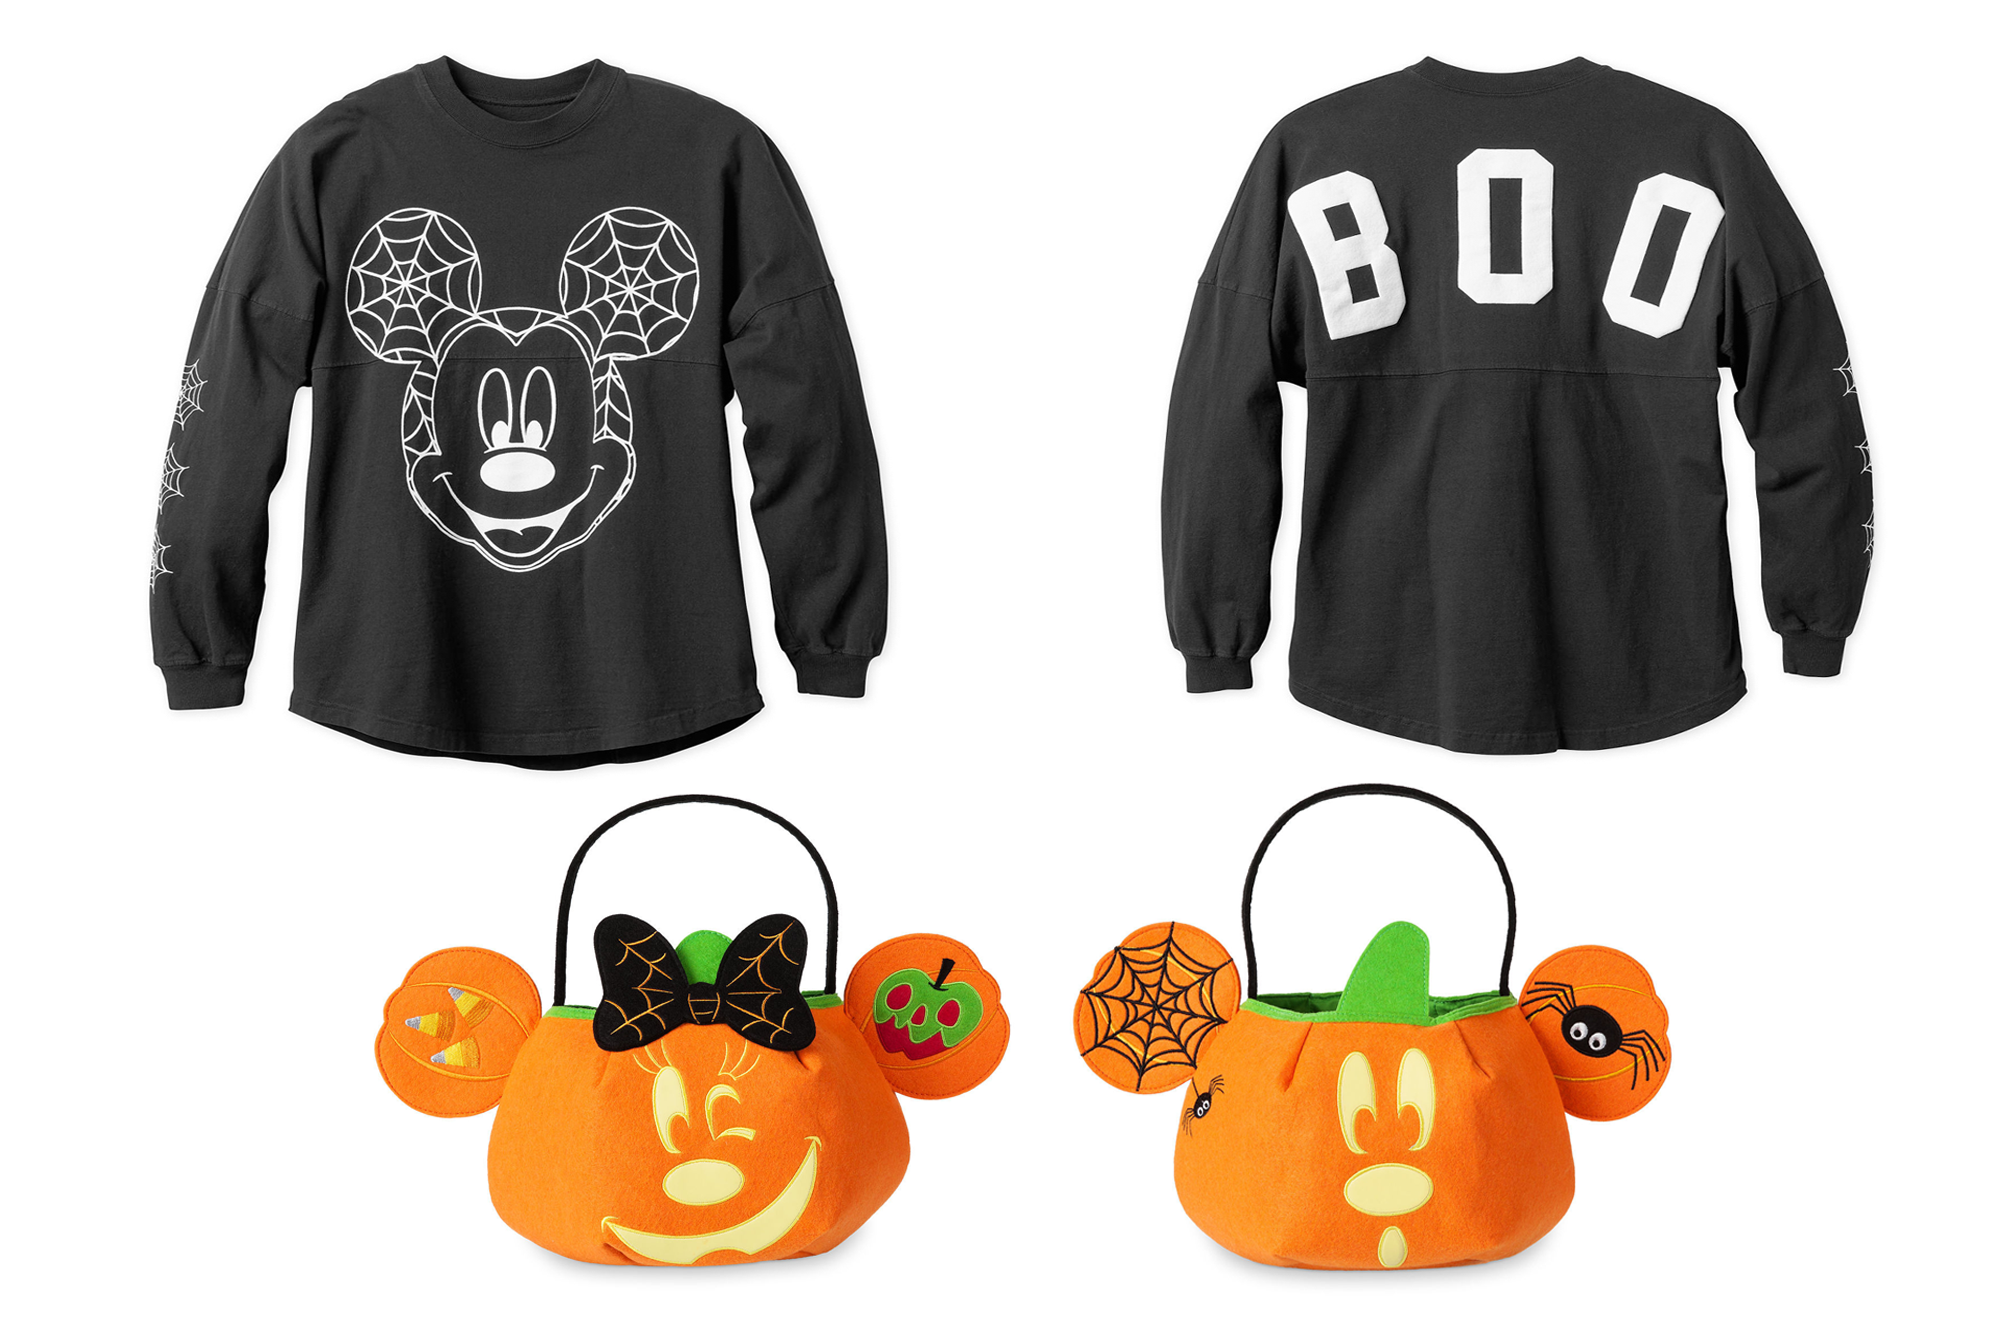 New Halloween Spirit Jersey, Tees and More Available on shopDisney